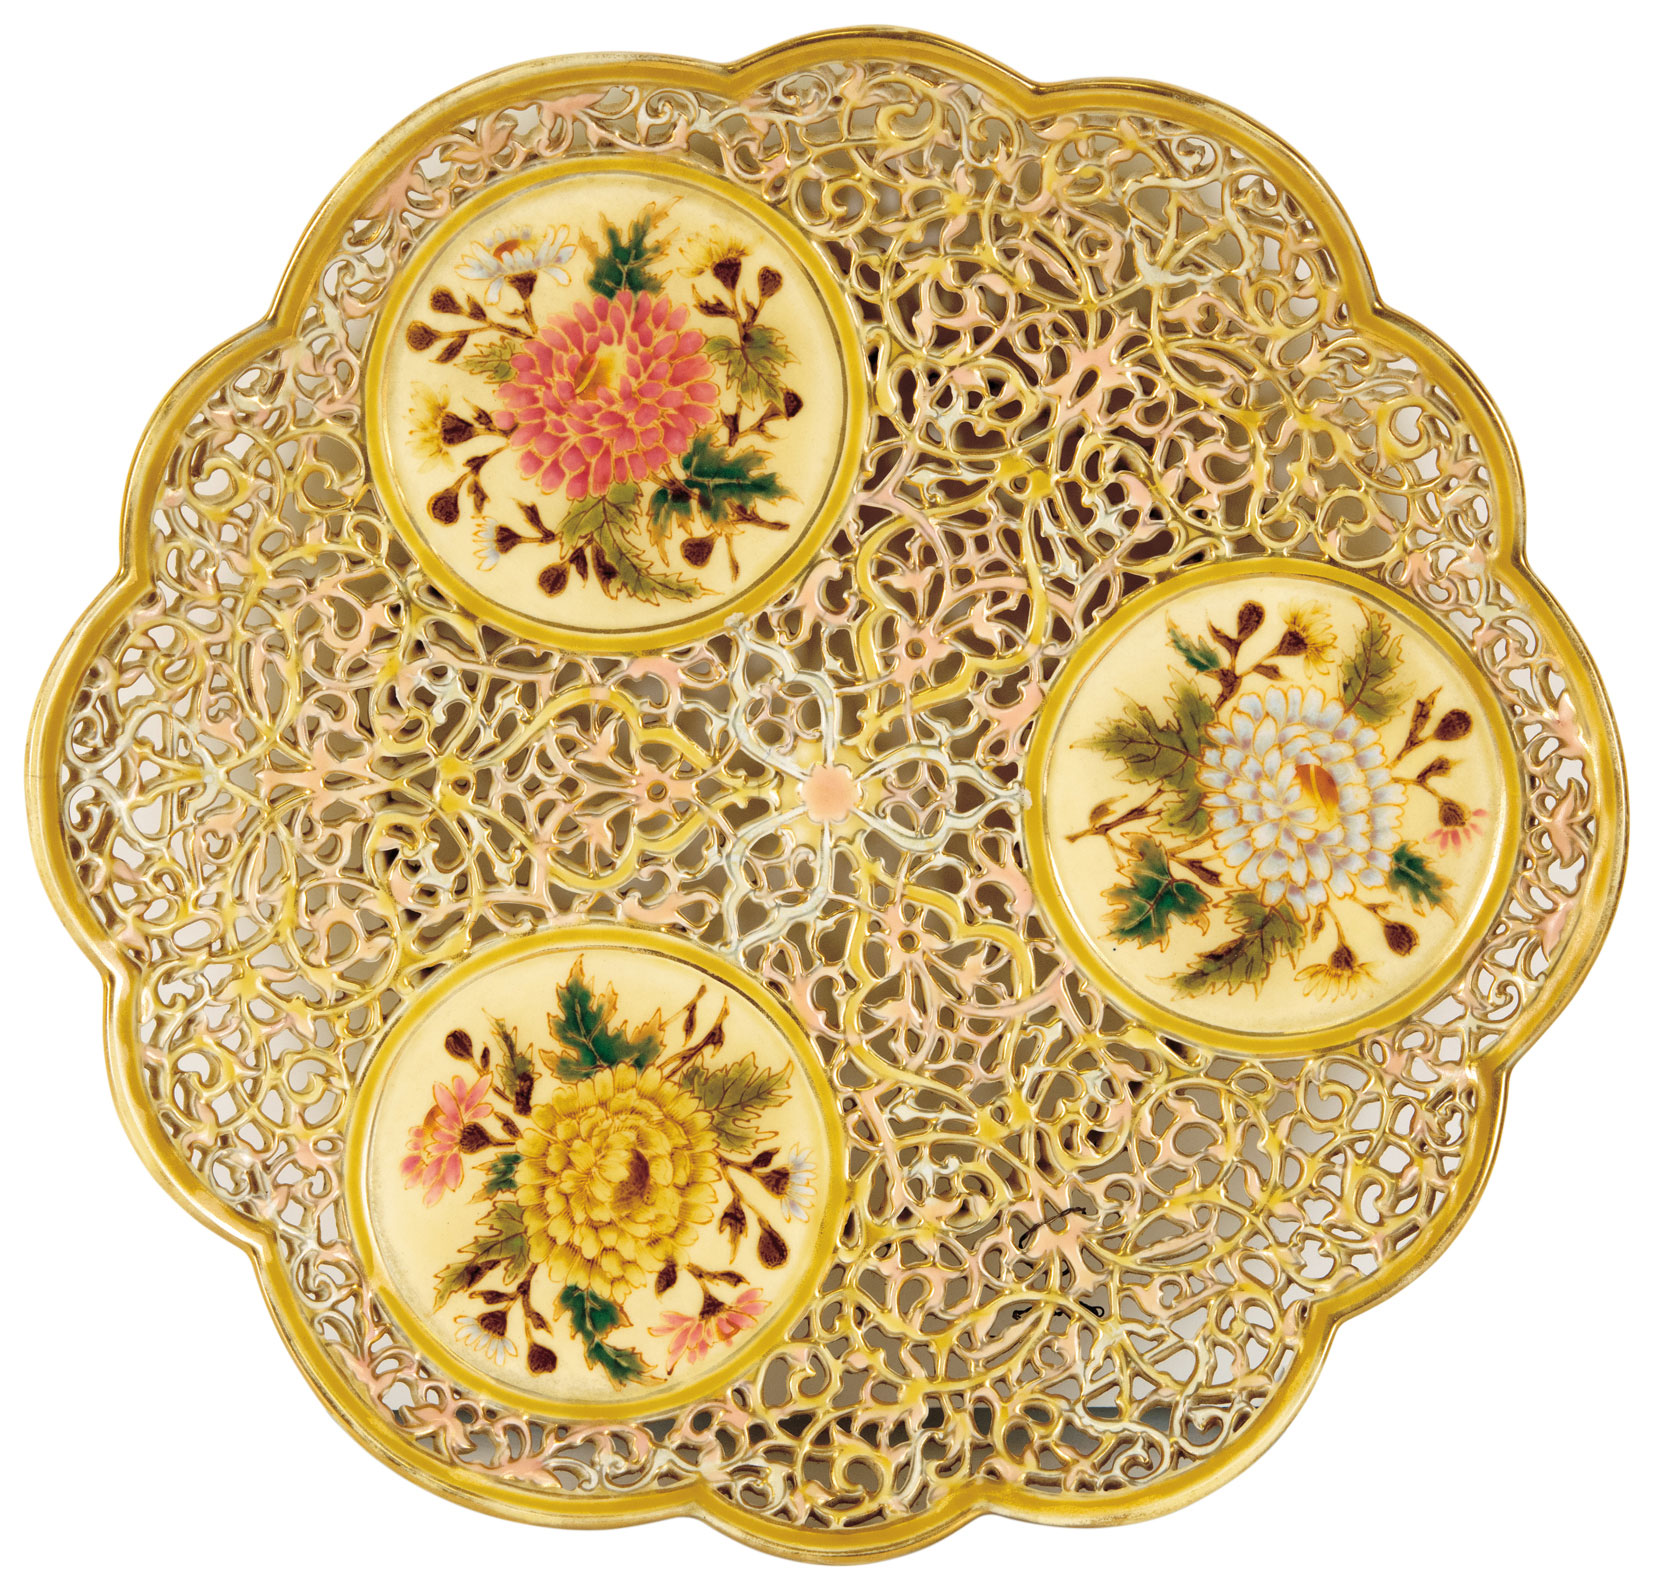 Zsolnay Decorative PLATE with Lace-like Tracery with Floral Fields, 1892